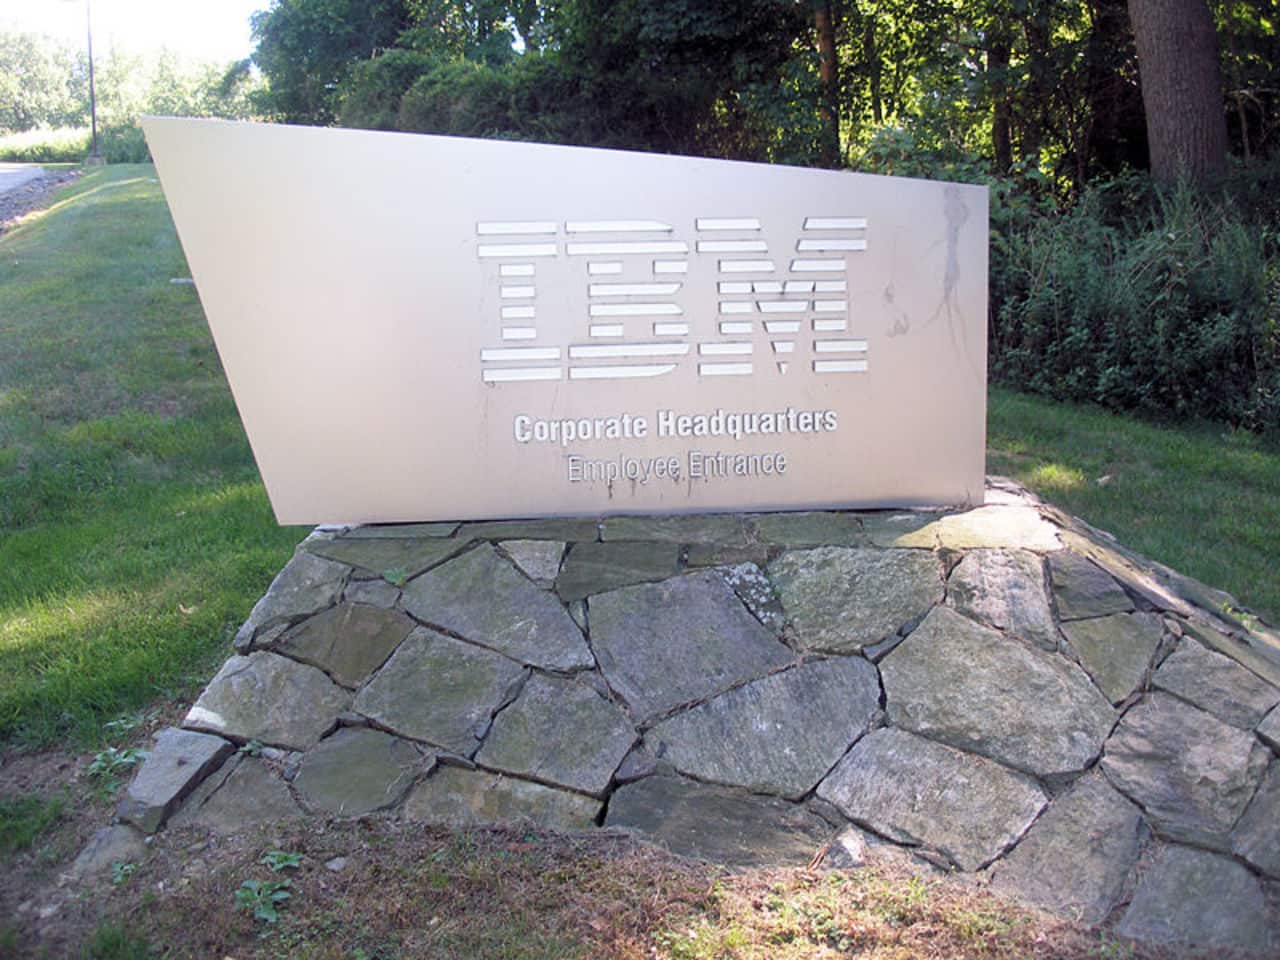 IBM reportedly is planning to sell its Somers campus and relocate staff to Armonk.